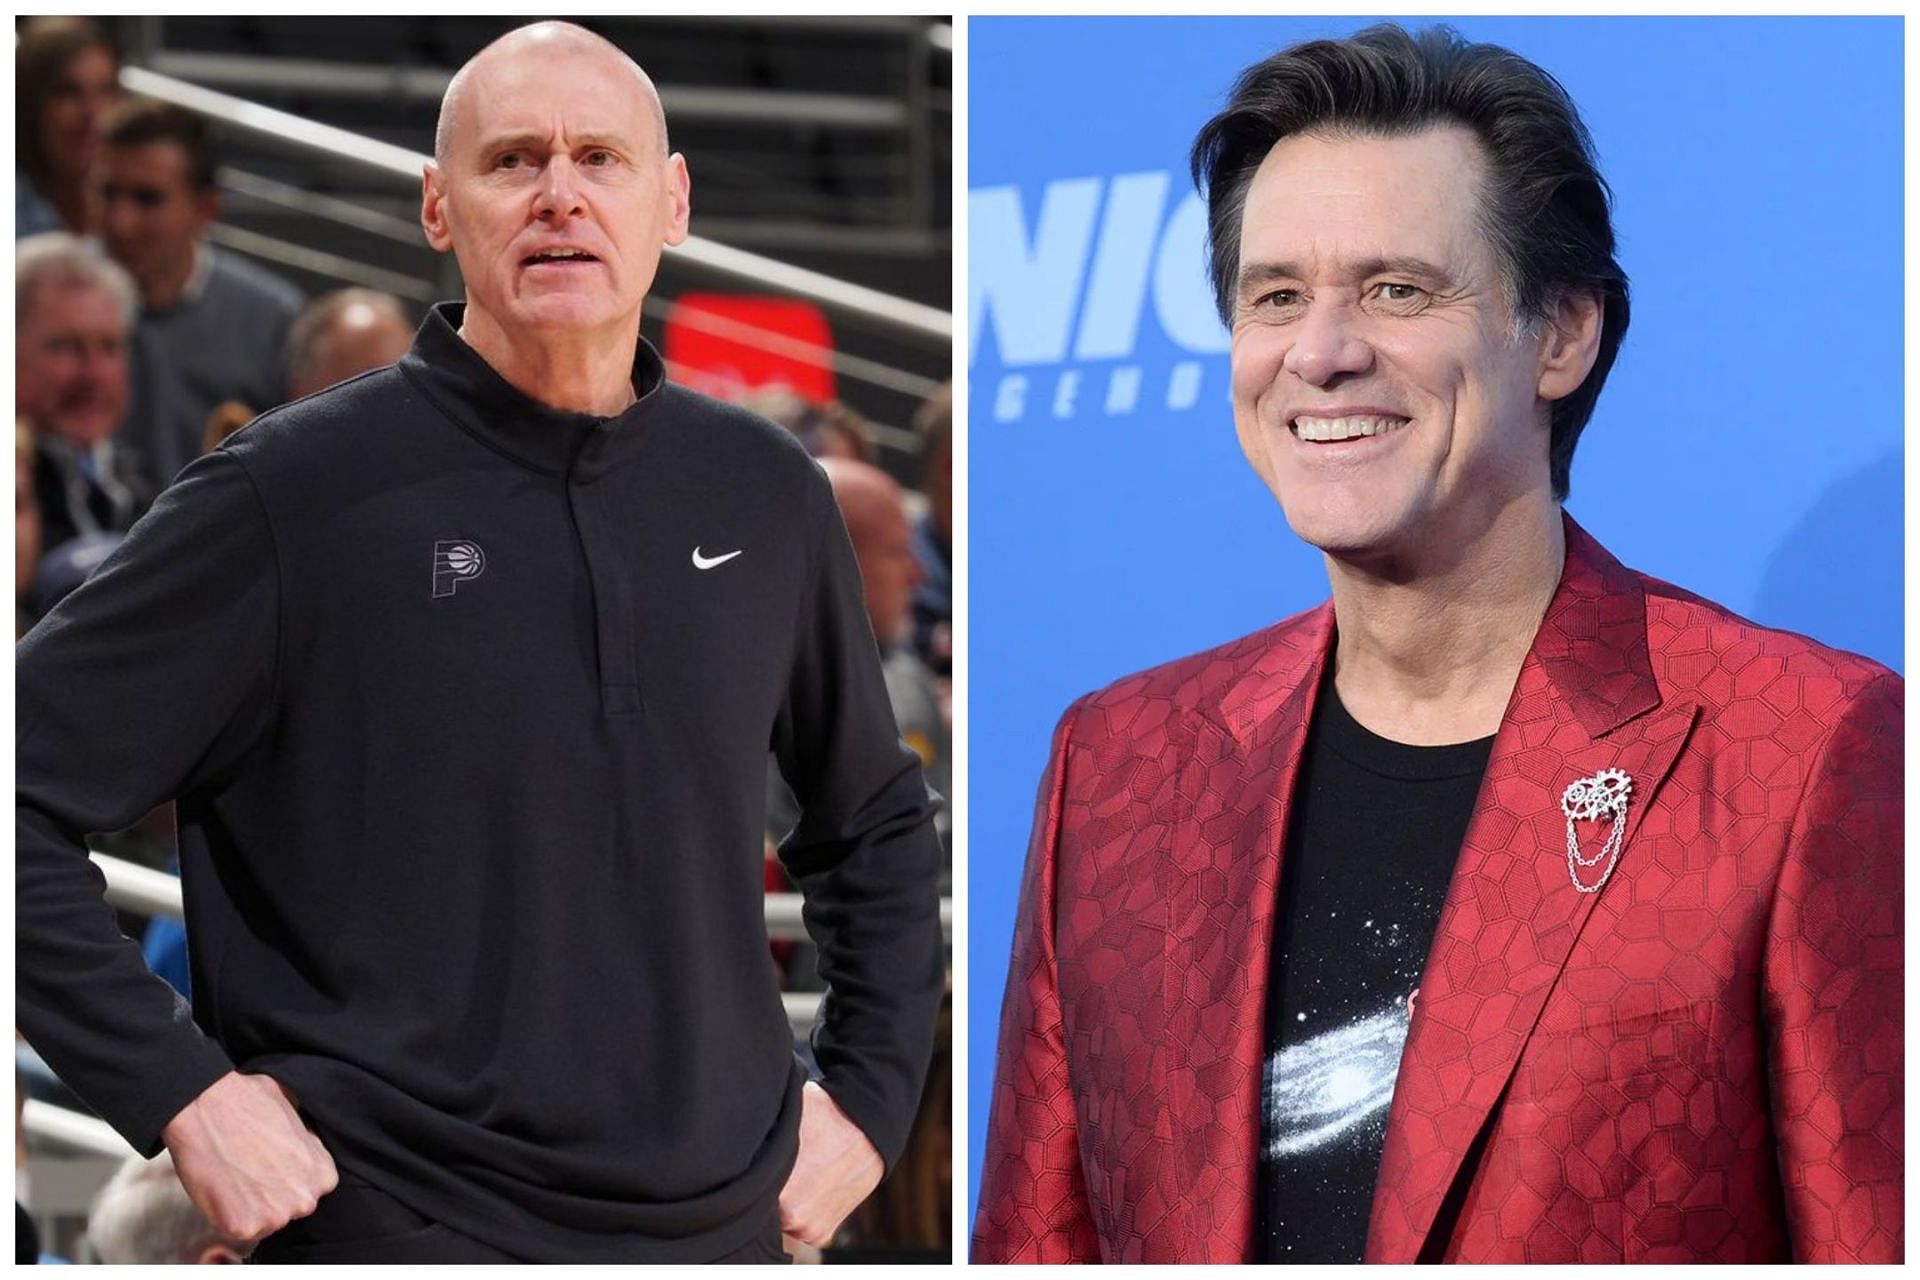 Rick Carlisle (left) of the Indiana Pacers os very much look alike famous actor Jim Carrey (right)